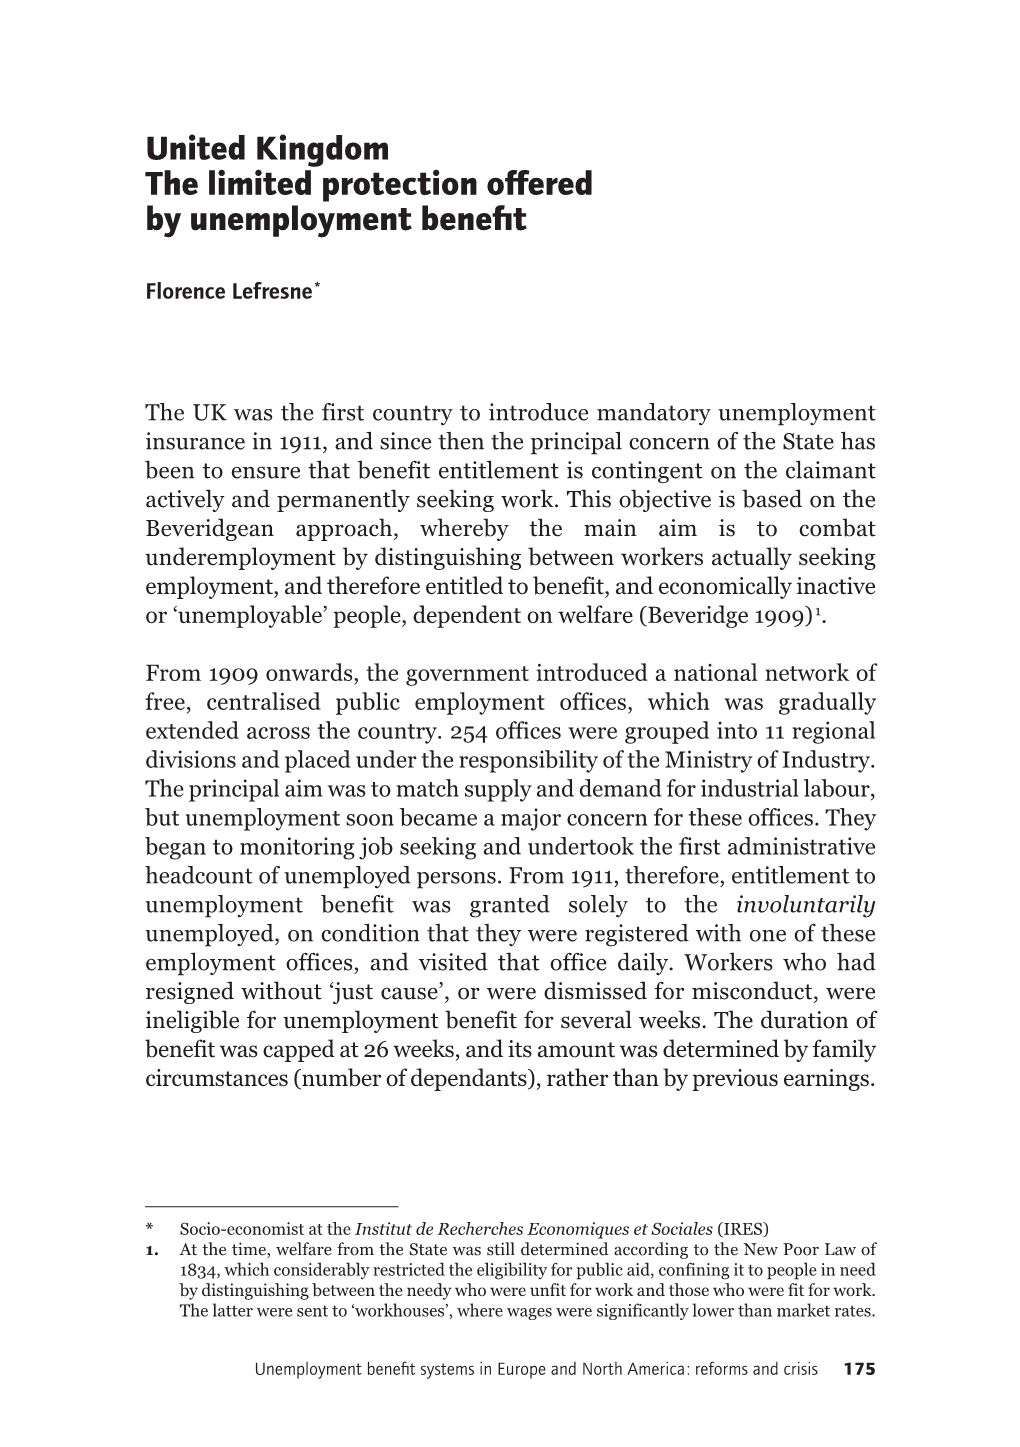 United Kingdom the Limited Protection Offered by Unemployment Benefit